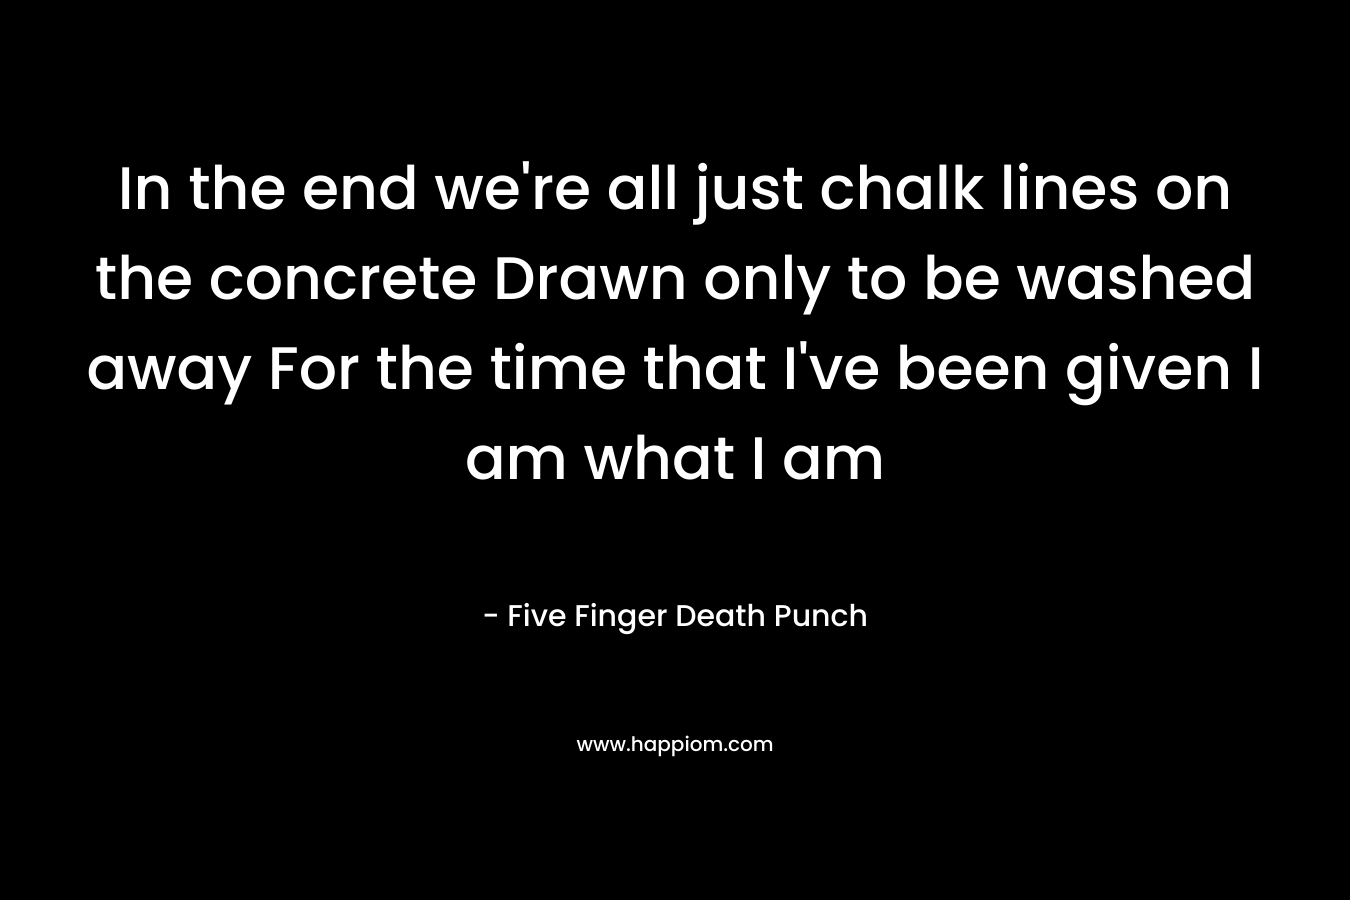 In the end we’re all just chalk lines on the concrete Drawn only to be washed away For the time that I’ve been given I am what I am – Five Finger Death Punch